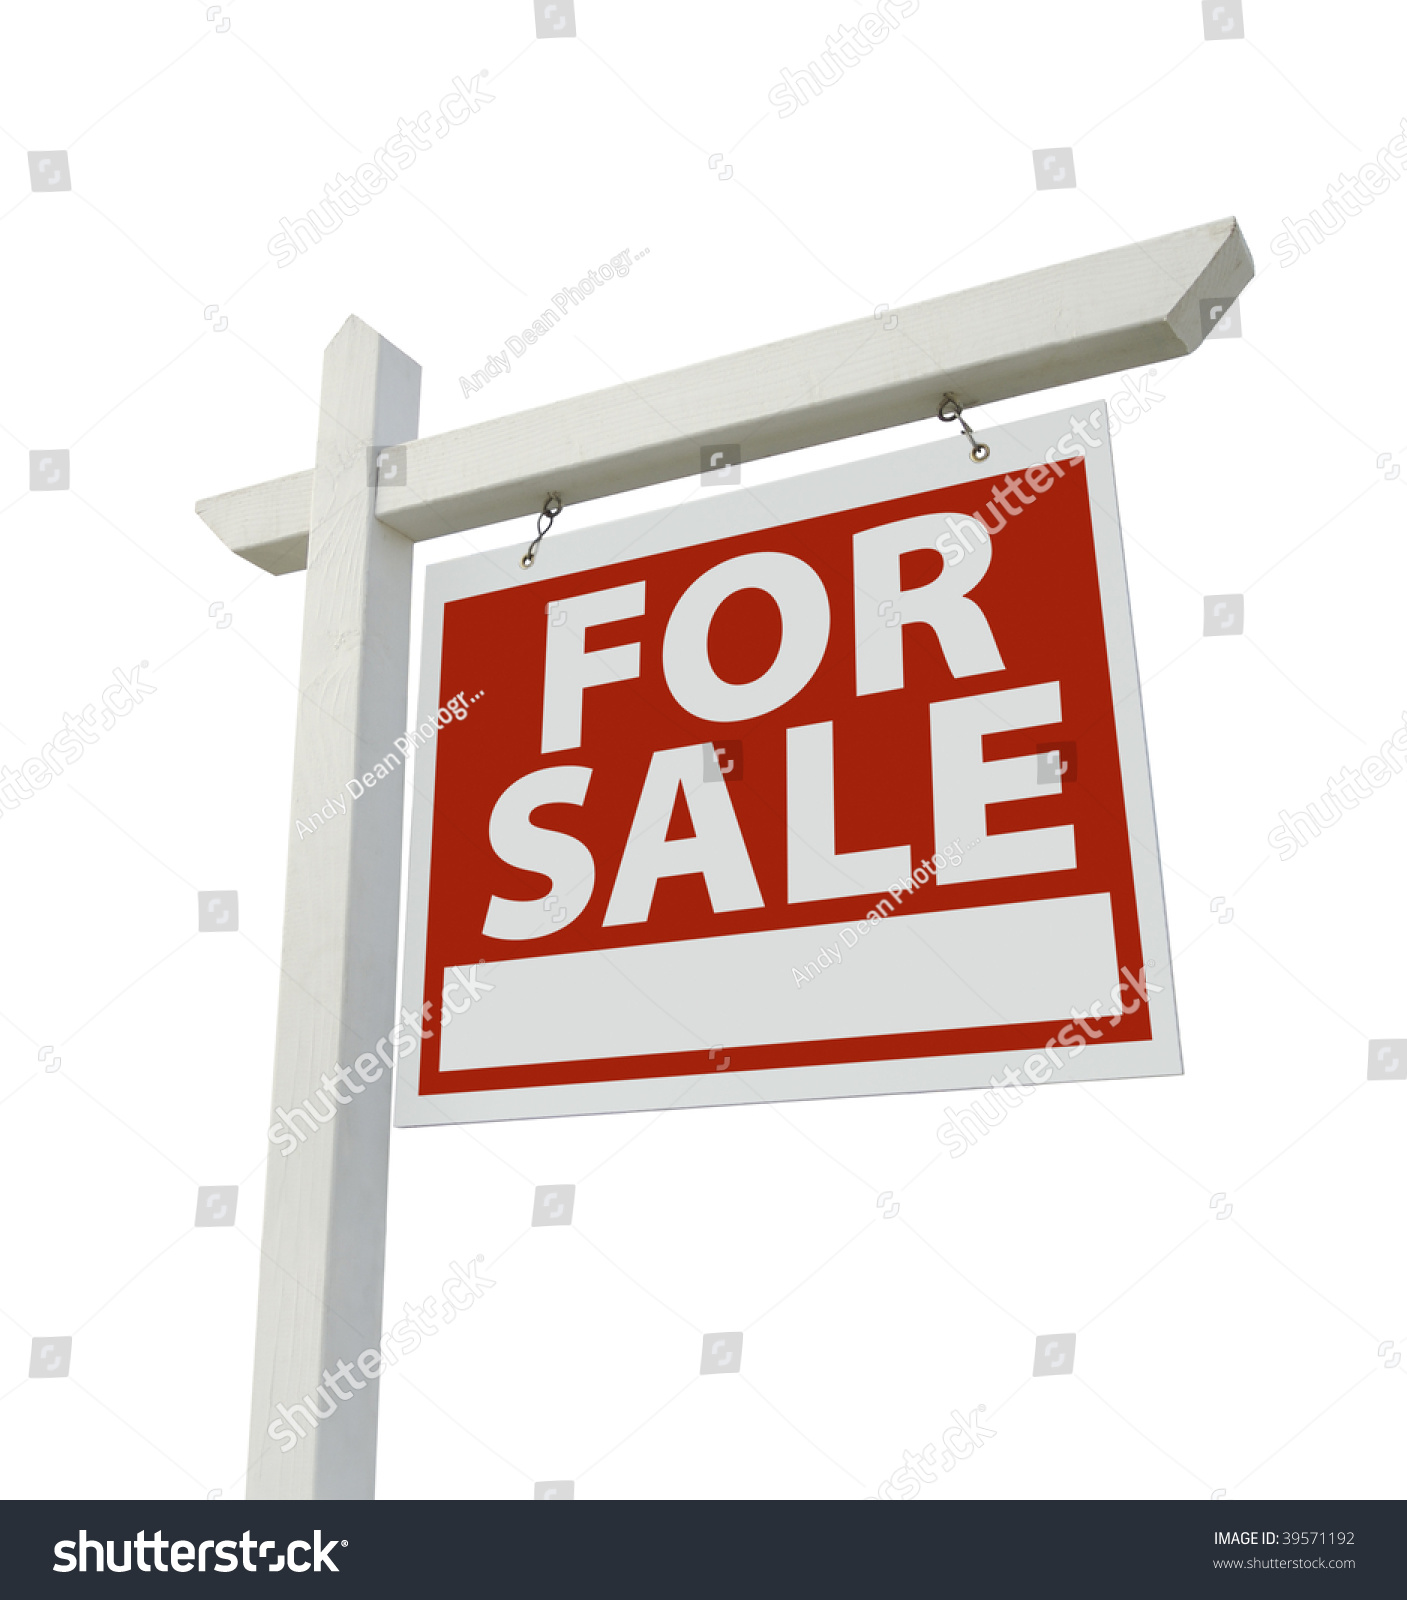 For Rent Real Estate Sign Isolated on a White Background. #39571192